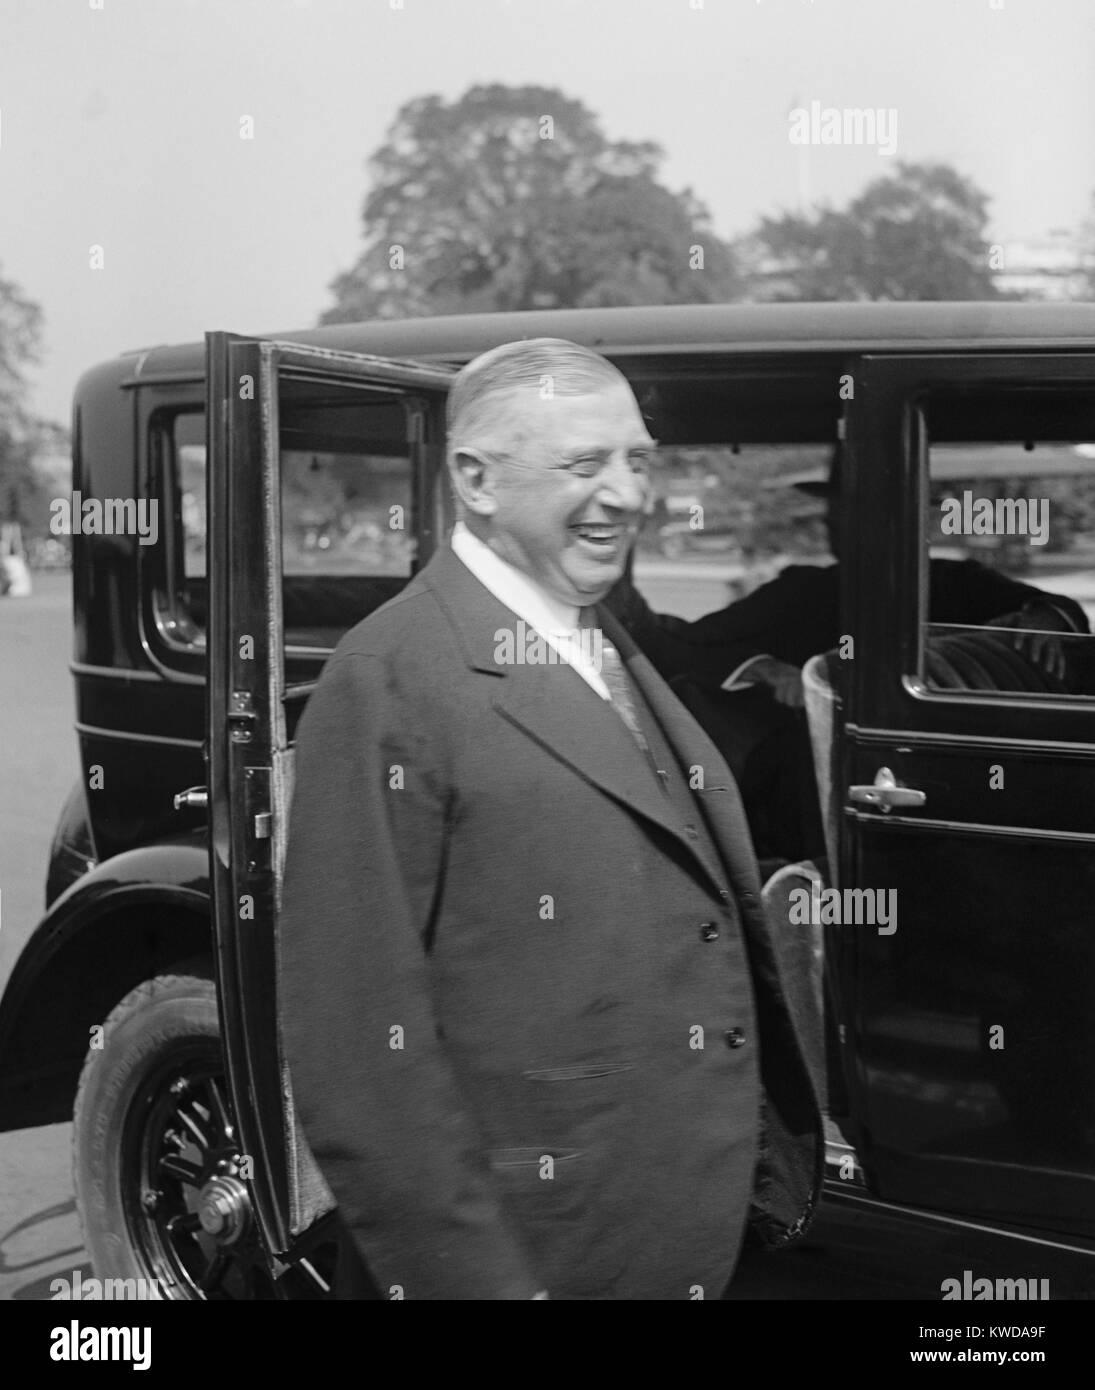 Charles M. Schwab on Sept. 21, 1929, shortly before the Black Friday Wall Street Crash. His spendthrift lifestyle had depleted his wealth, which was reduced further by the Great Depression. He died in 1939 leaving $300,000 in debts (BSLOC 2016 8 12) Stock Photo